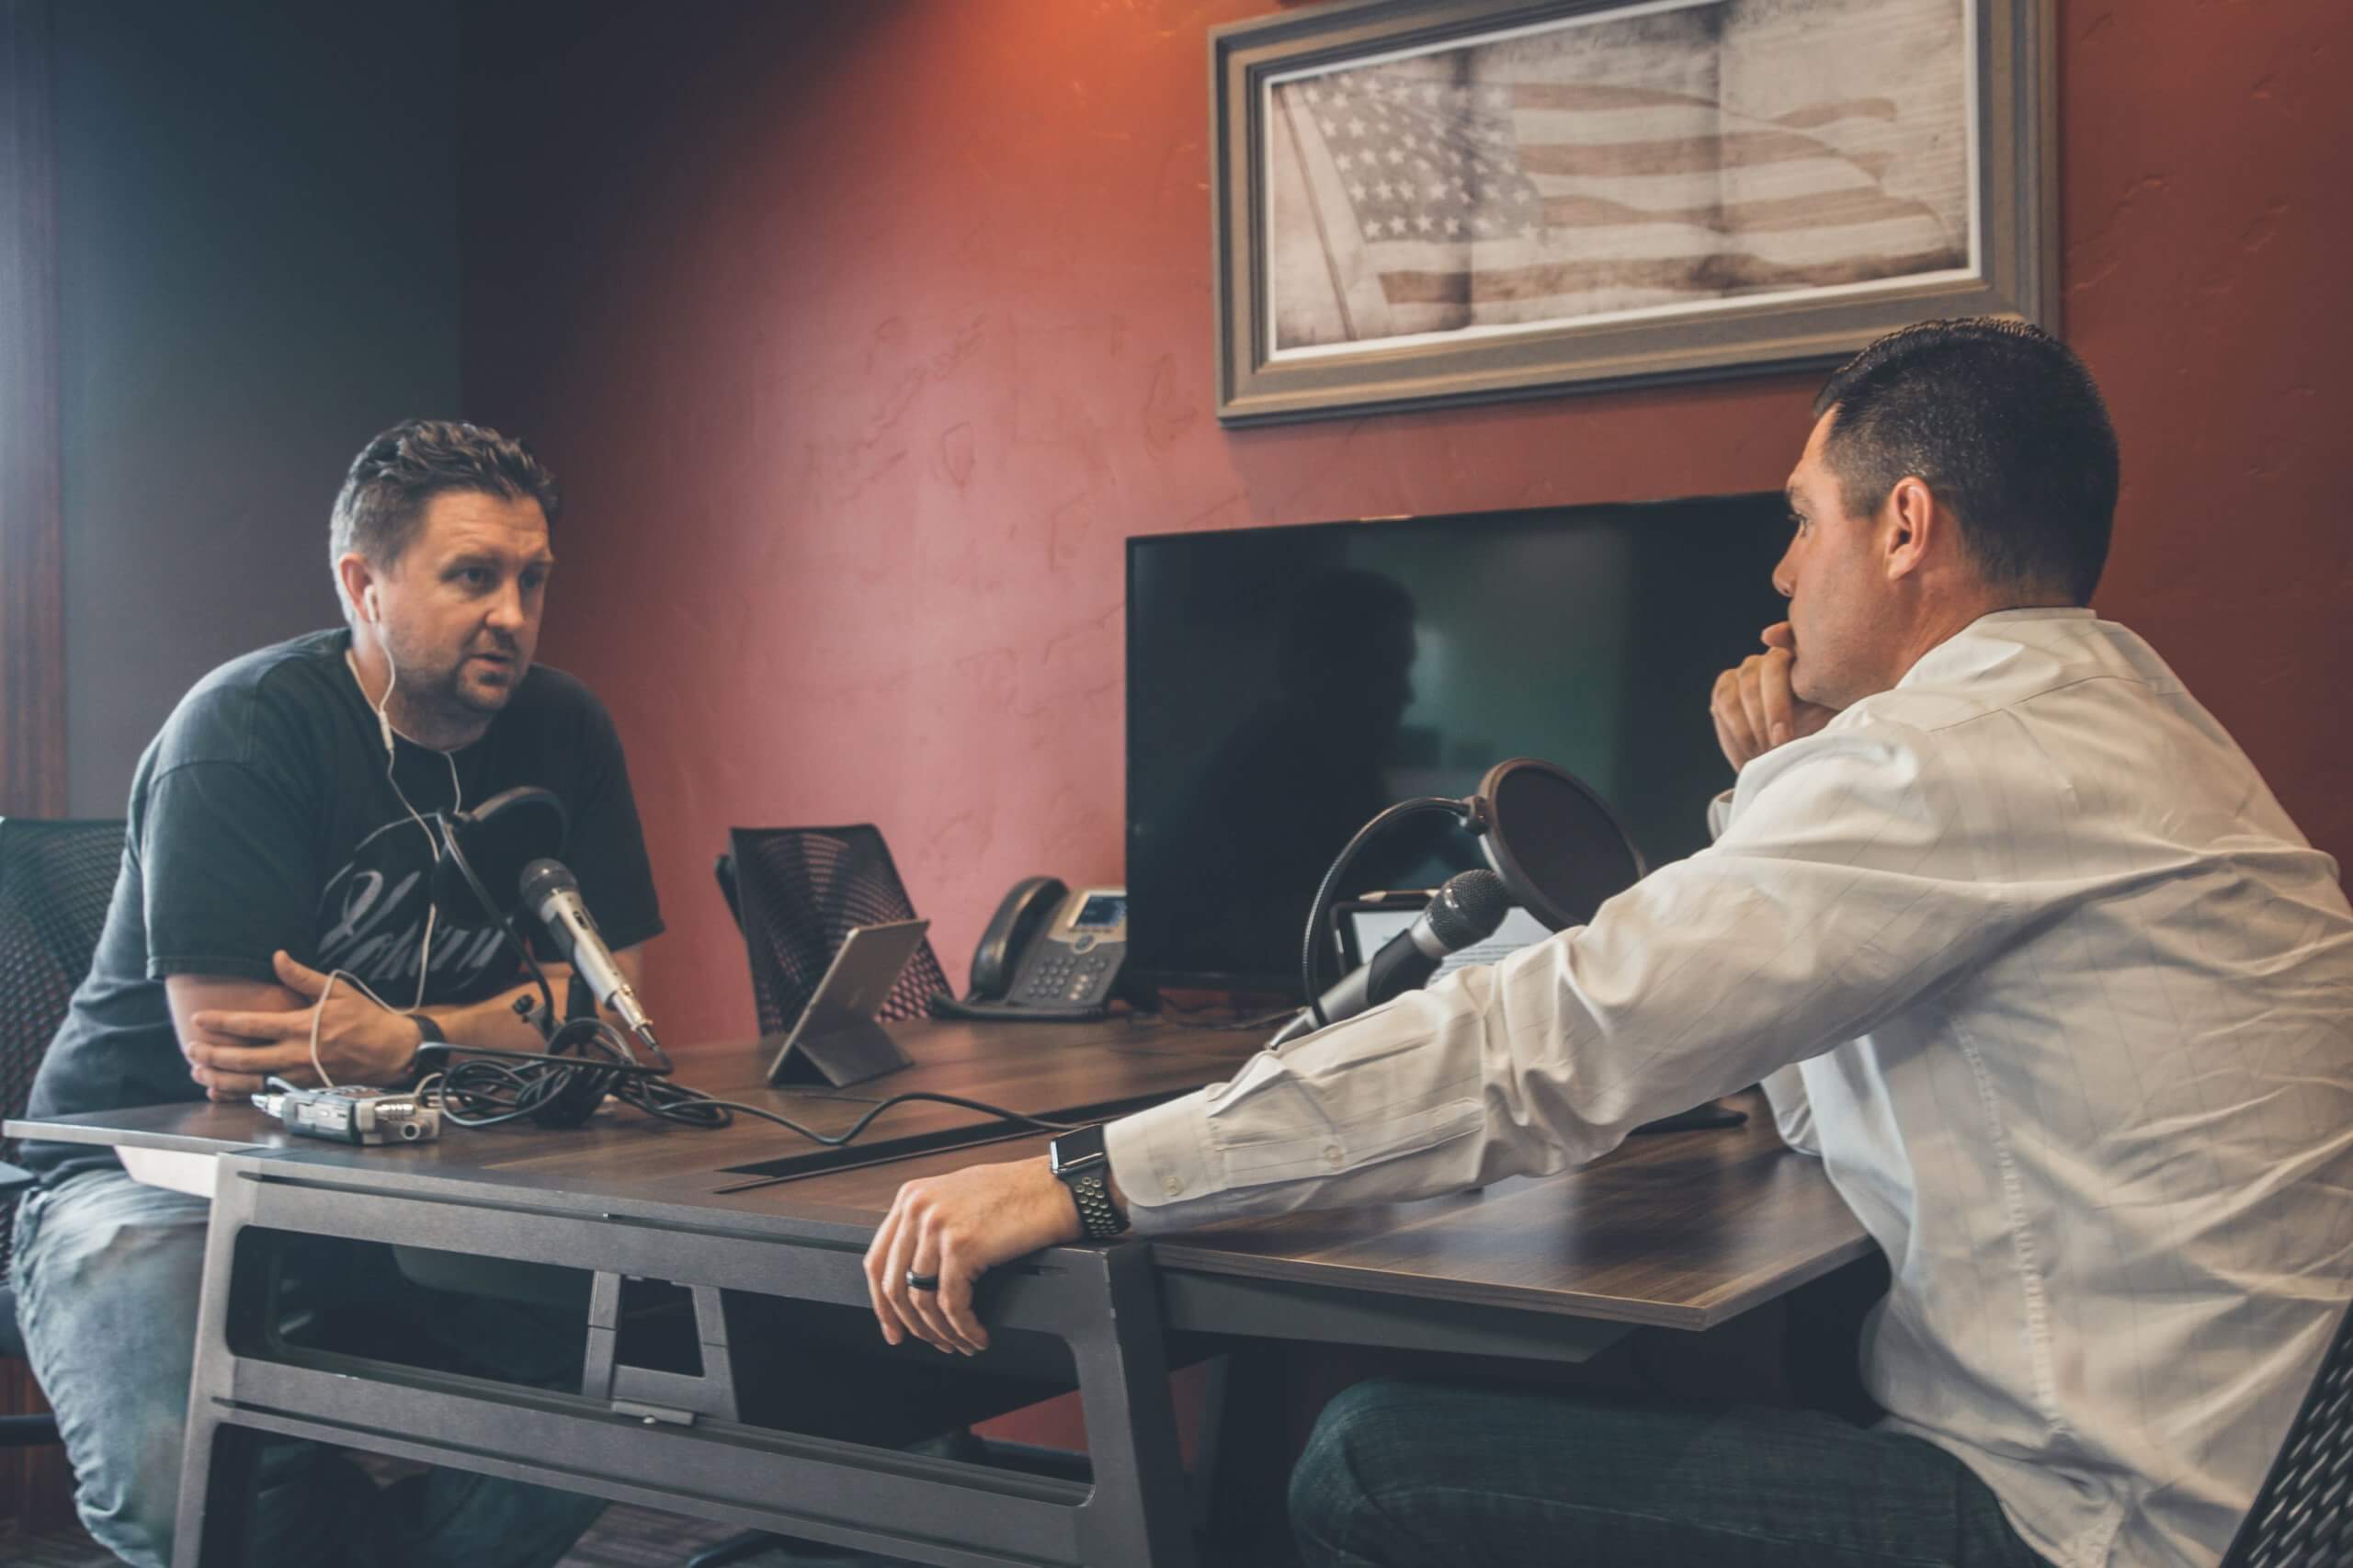 5 Reason your business needs a podcast.